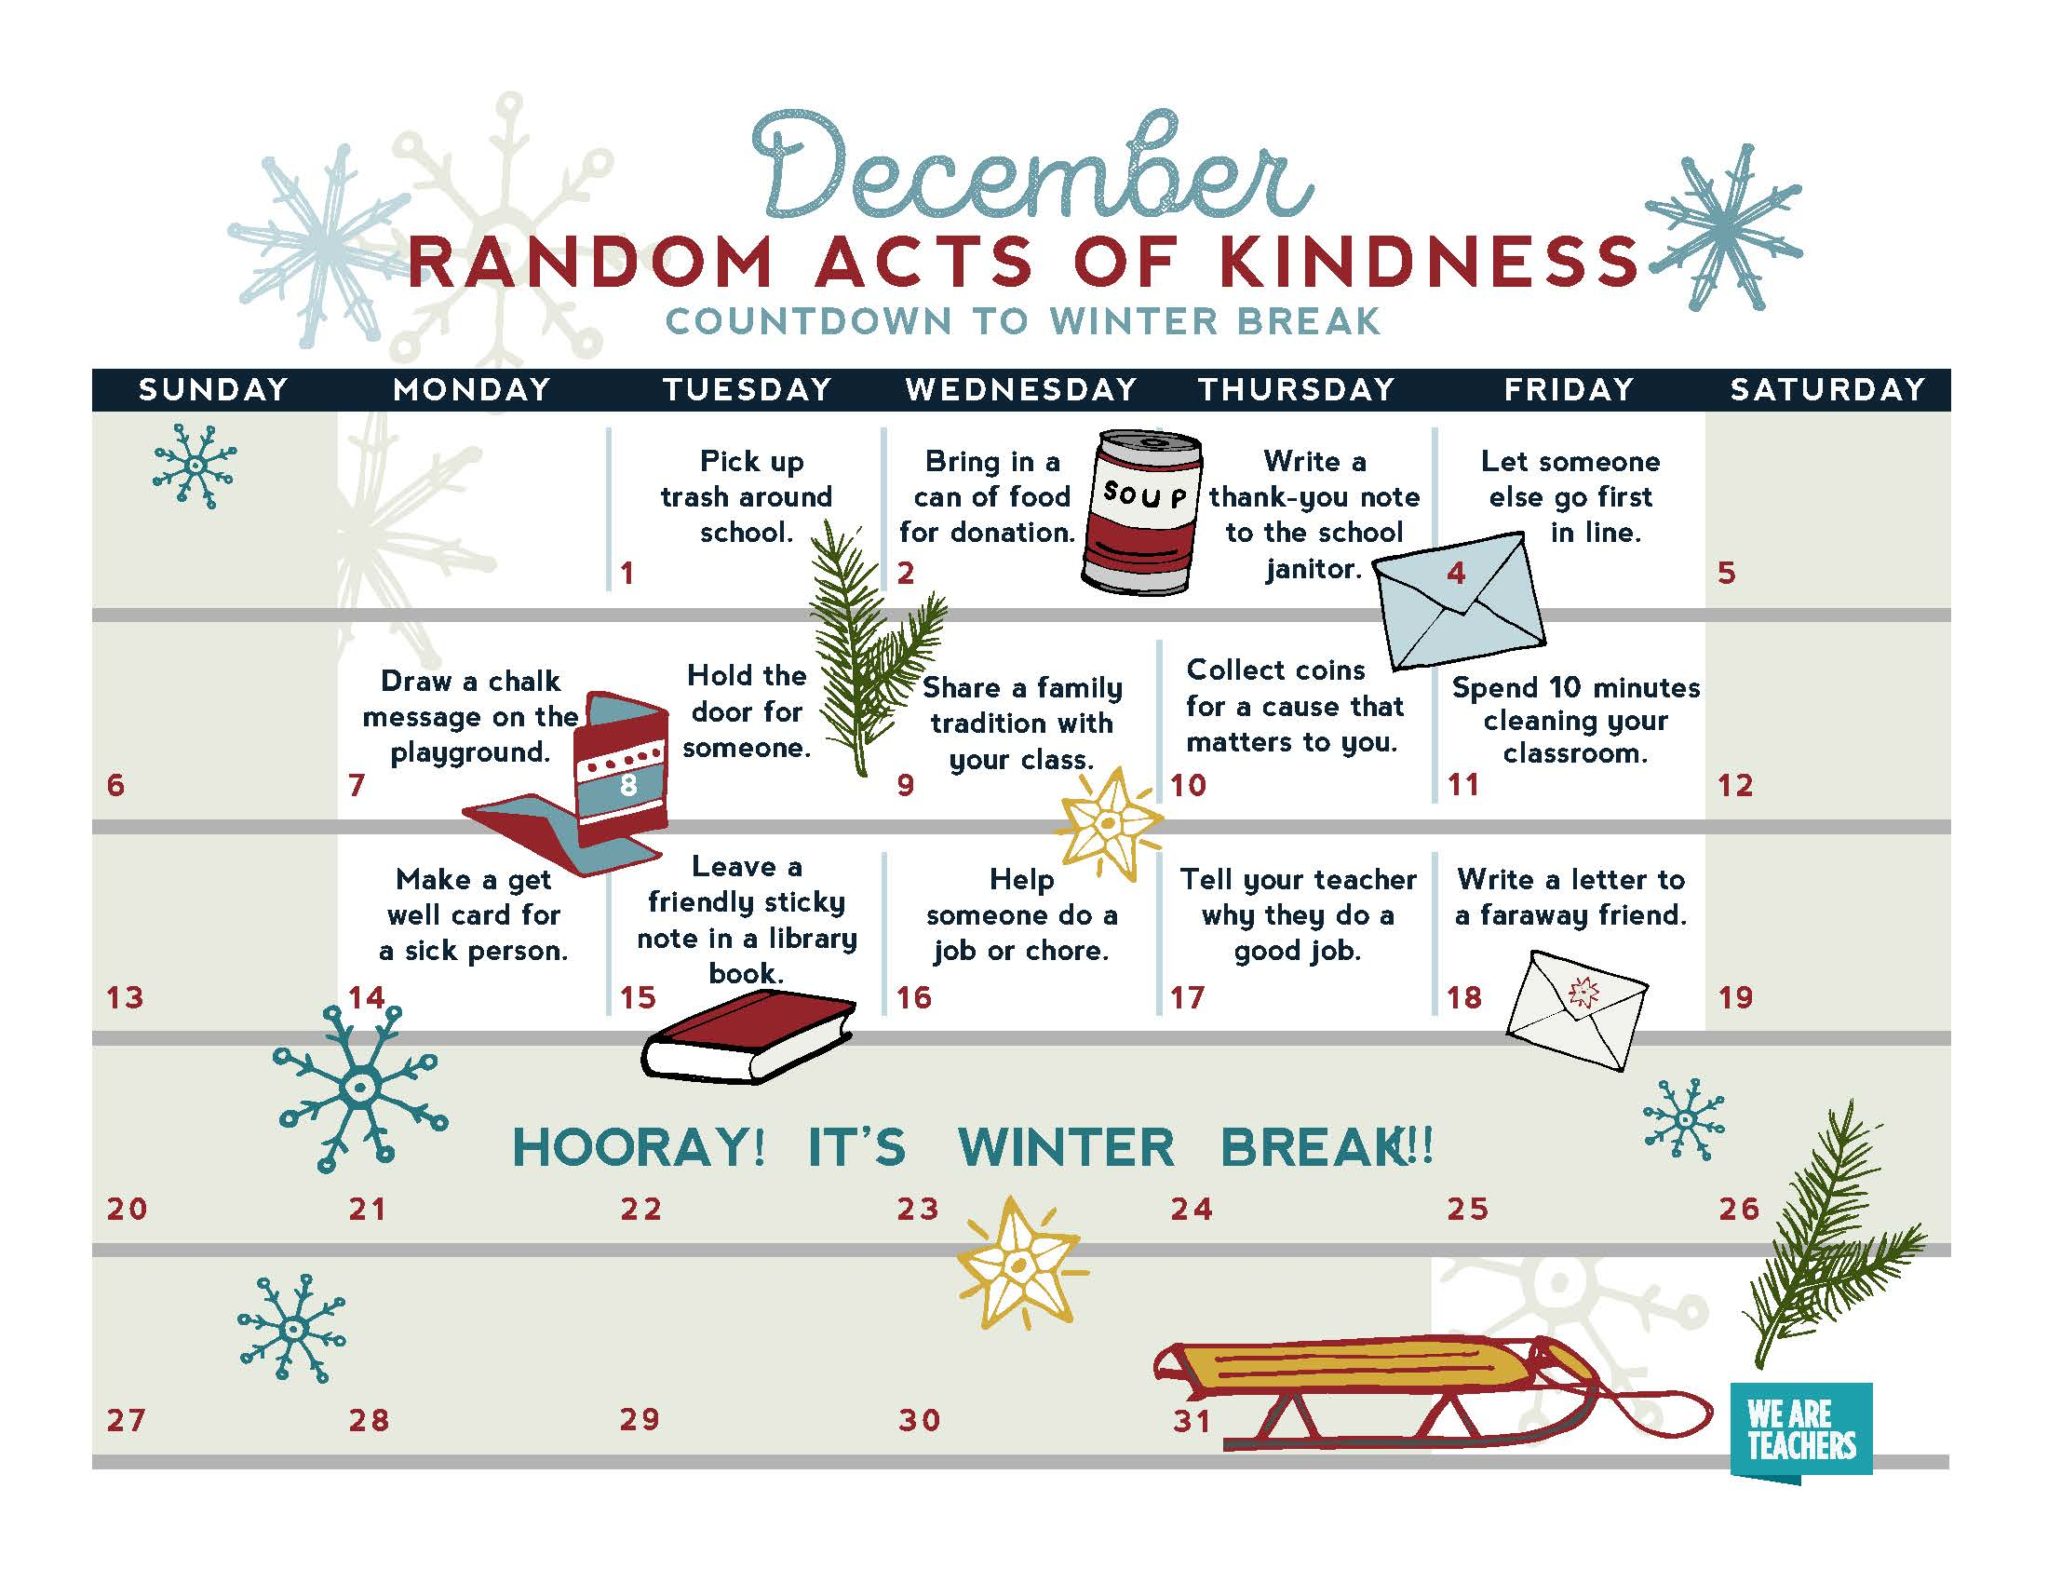 Random Acts of Kindness Calendar - Free Printable for the Classroom